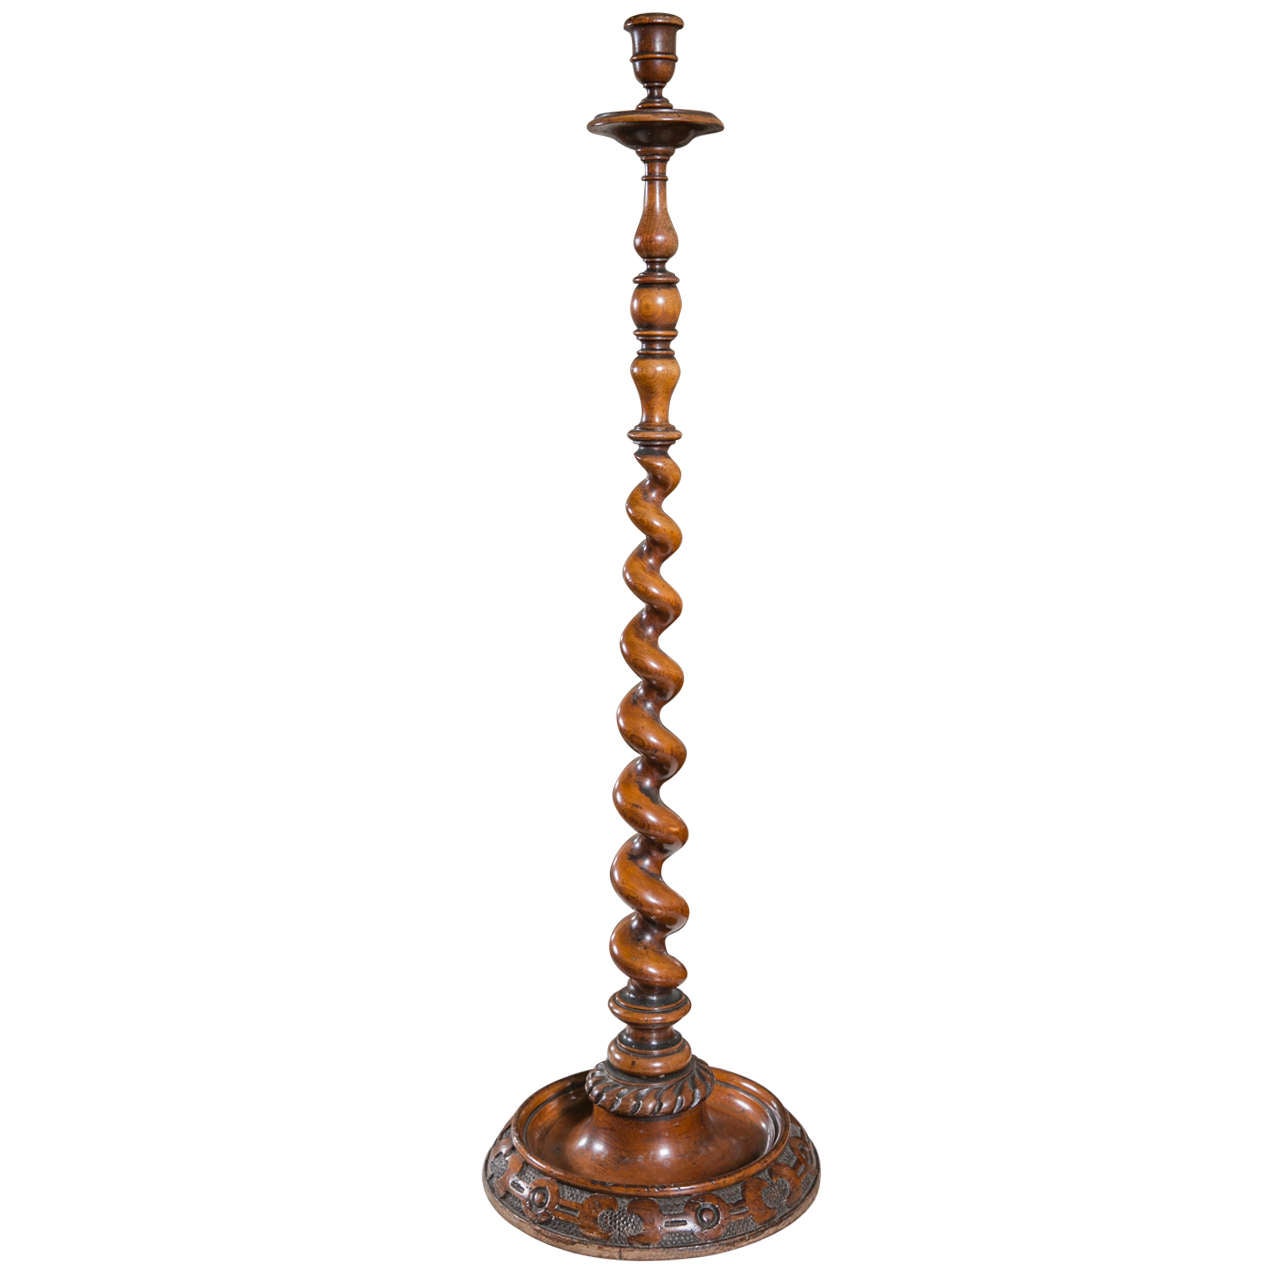 Antique Barley Twist Standing Candlestick For Sale